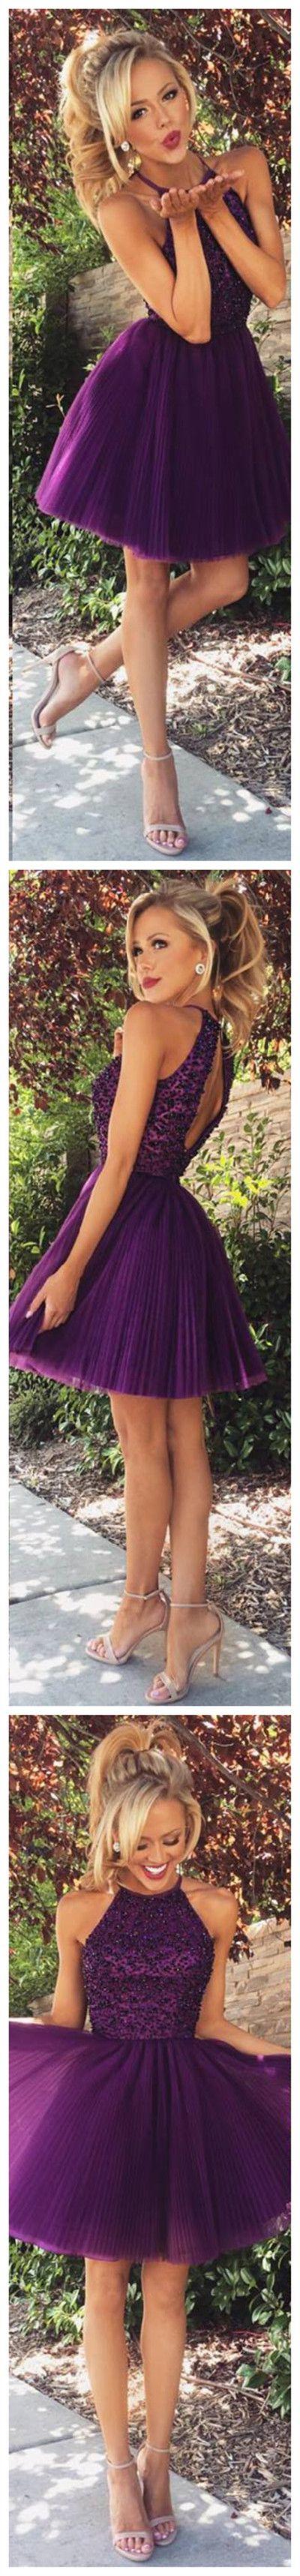 Wedding - A-line High Neck Black Beaded Bodice Grape Tulle Short Prom Homecoming Dresses APD1557 From DiyDressonline